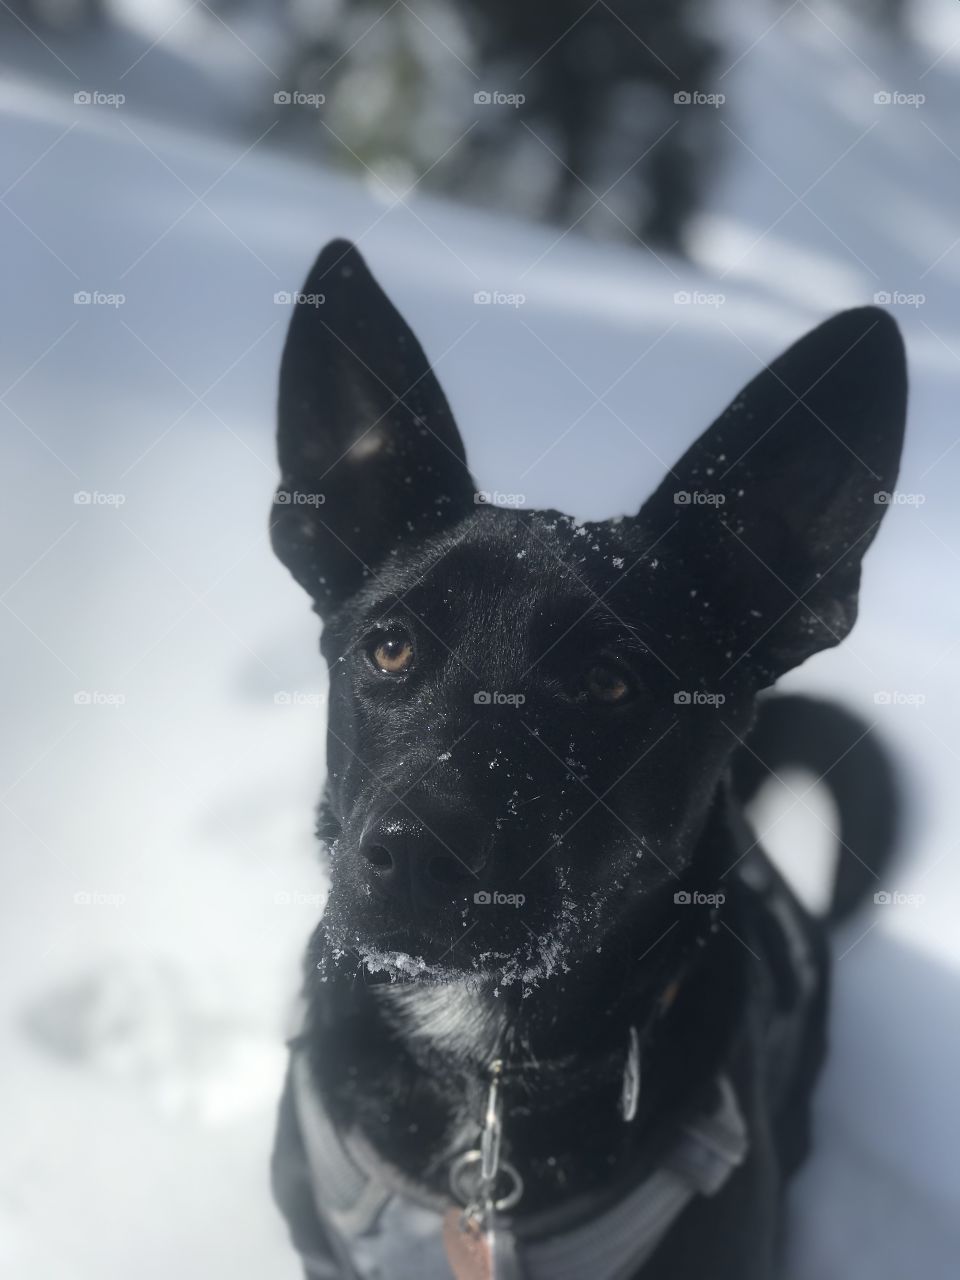 A face full of snow and ears perked up to listen. An eager pup awaits the throwing of his new favorite stick. 